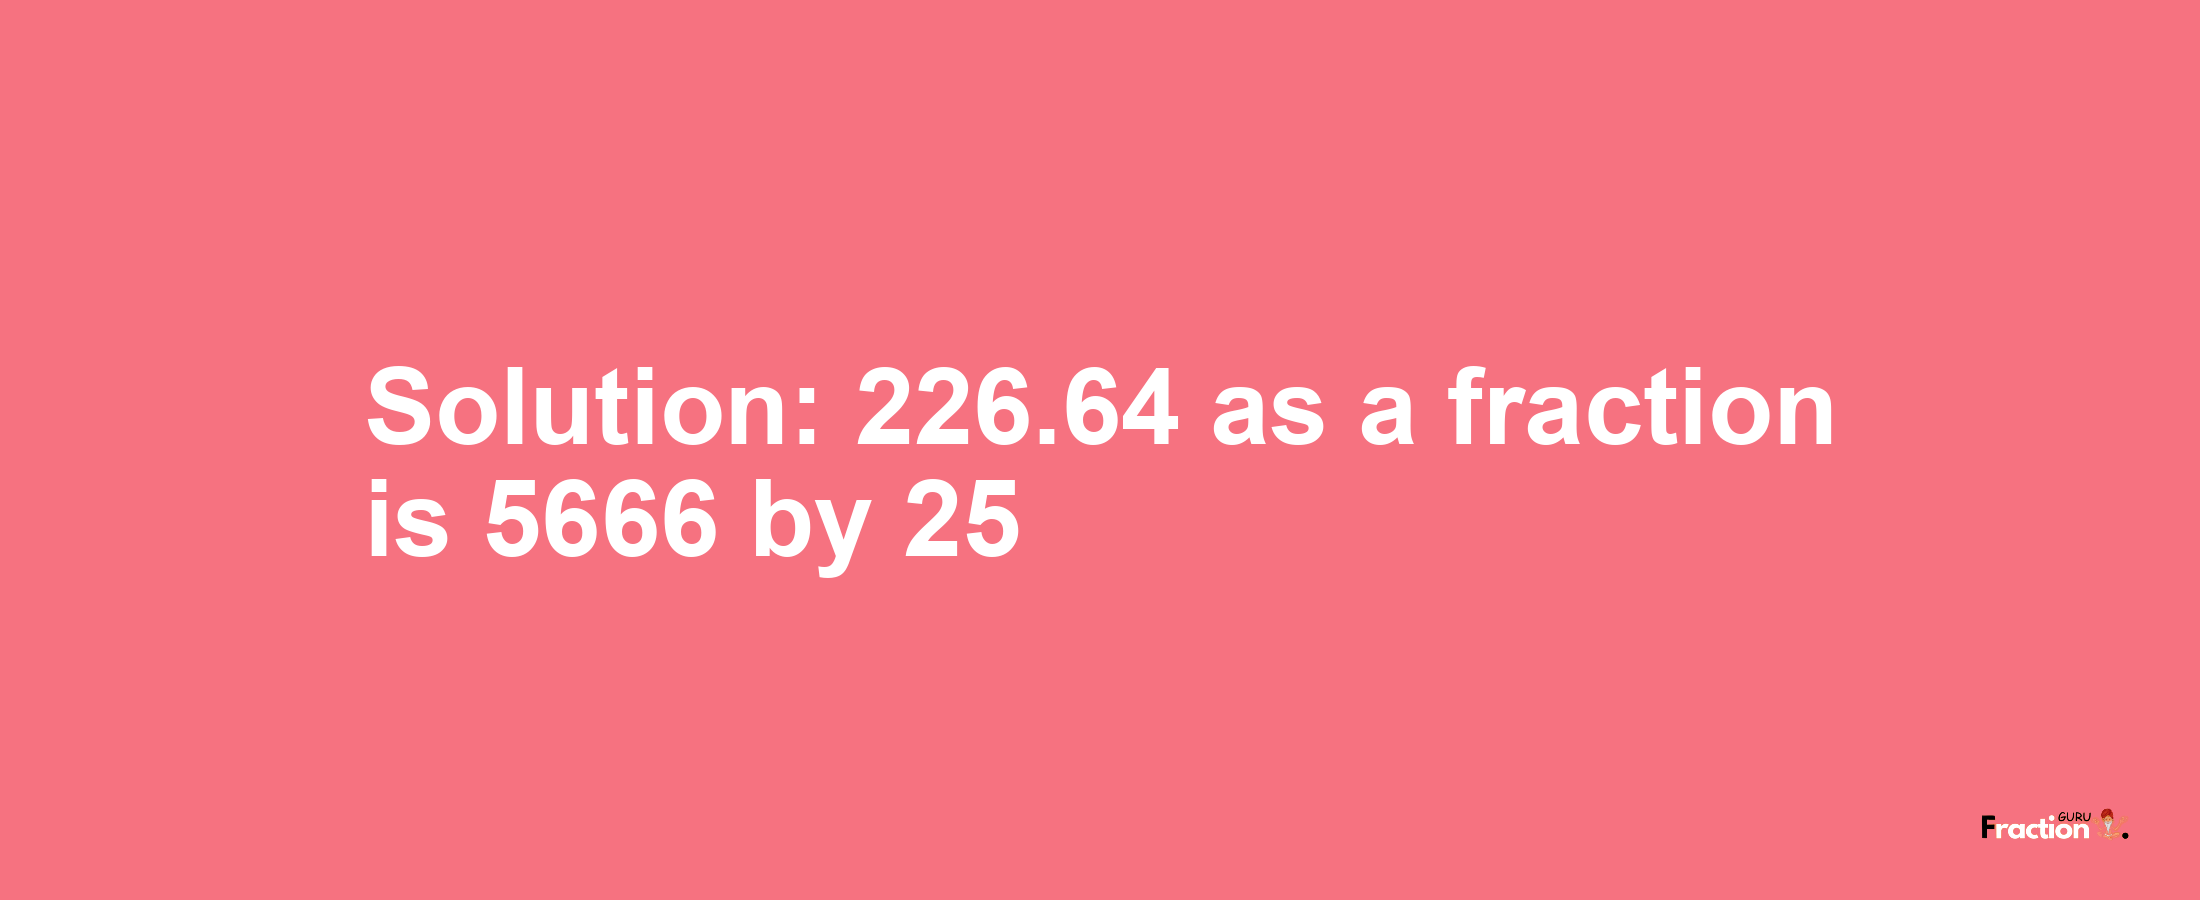 Solution:226.64 as a fraction is 5666/25